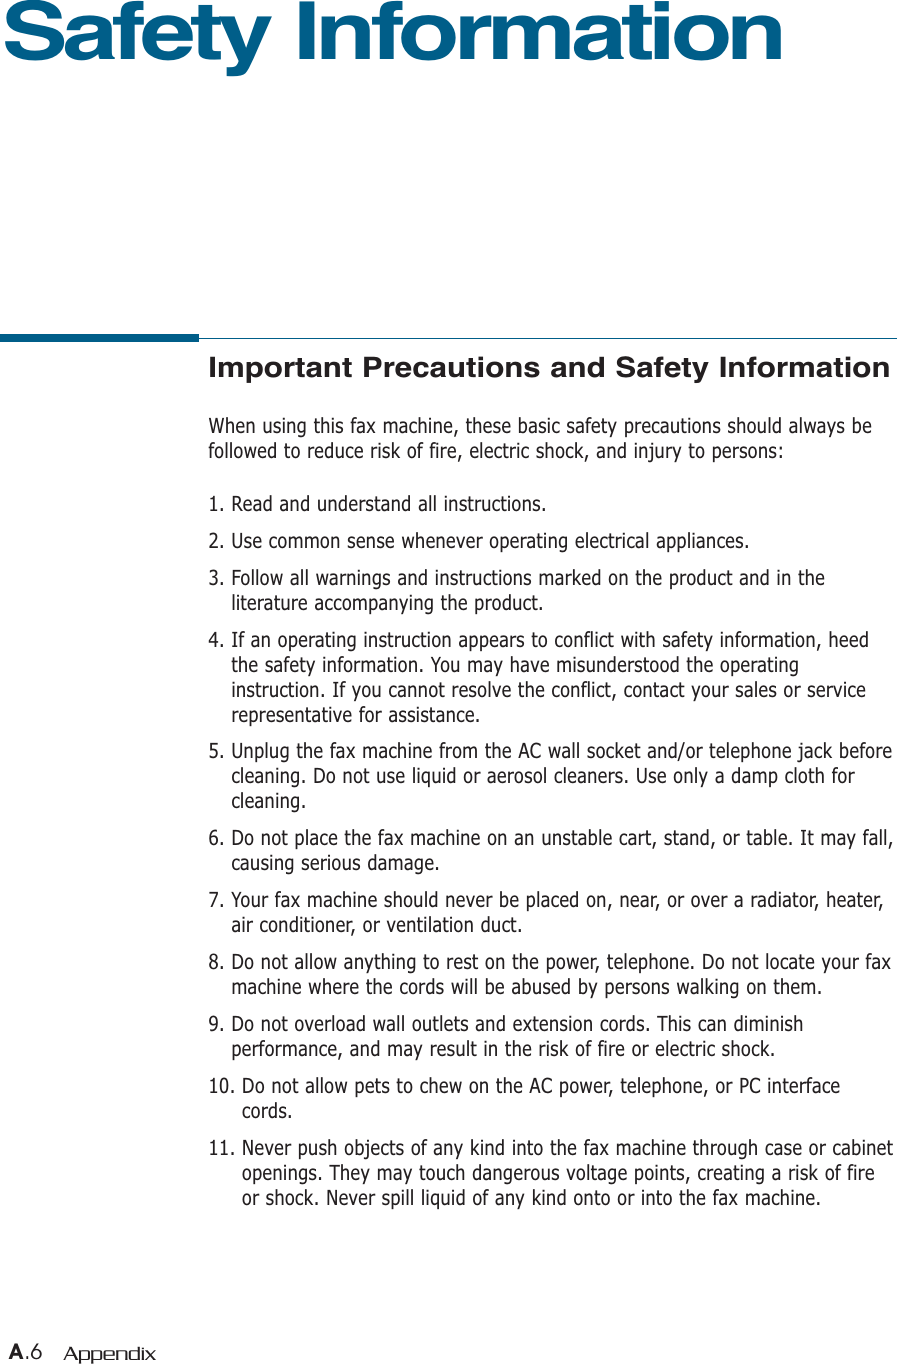 A.6 AppendixImportant Precautions and Safety InformationWhen using this fax machine, these basic safety precautions should always befollowed to reduce risk of fire, electric shock, and injury to persons:1. Read and understand all instructions.2. Use common sense whenever operating electrical appliances.3. Follow all warnings and instructions marked on the product and in theliterature accompanying the product.4. If an operating instruction appears to conflict with safety information, heedthe safety information. You may have misunderstood the operatinginstruction. If you cannot resolve the conflict, contact your sales or servicerepresentative for assistance.5. Unplug the fax machine from the AC wall socket and/or telephone jack beforecleaning. Do not use liquid or aerosol cleaners. Use only a damp cloth forcleaning.6. Do not place the fax machine on an unstable cart, stand, or table. It may fall,causing serious damage.7. Your fax machine should never be placed on, near, or over a radiator, heater,air conditioner, or ventilation duct.8. Do not allow anything to rest on the power, telephone. Do not locate your faxmachine where the cords will be abused by persons walking on them.9. Do not overload wall outlets and extension cords. This can diminishperformance, and may result in the risk of fire or electric shock.10. Do not allow pets to chew on the AC power, telephone, or PC interfacecords.11. Never push objects of any kind into the fax machine through case or cabinetopenings. They may touch dangerous voltage points, creating a risk of fireor shock. Never spill liquid of any kind onto or into the fax machine.Safety Information 